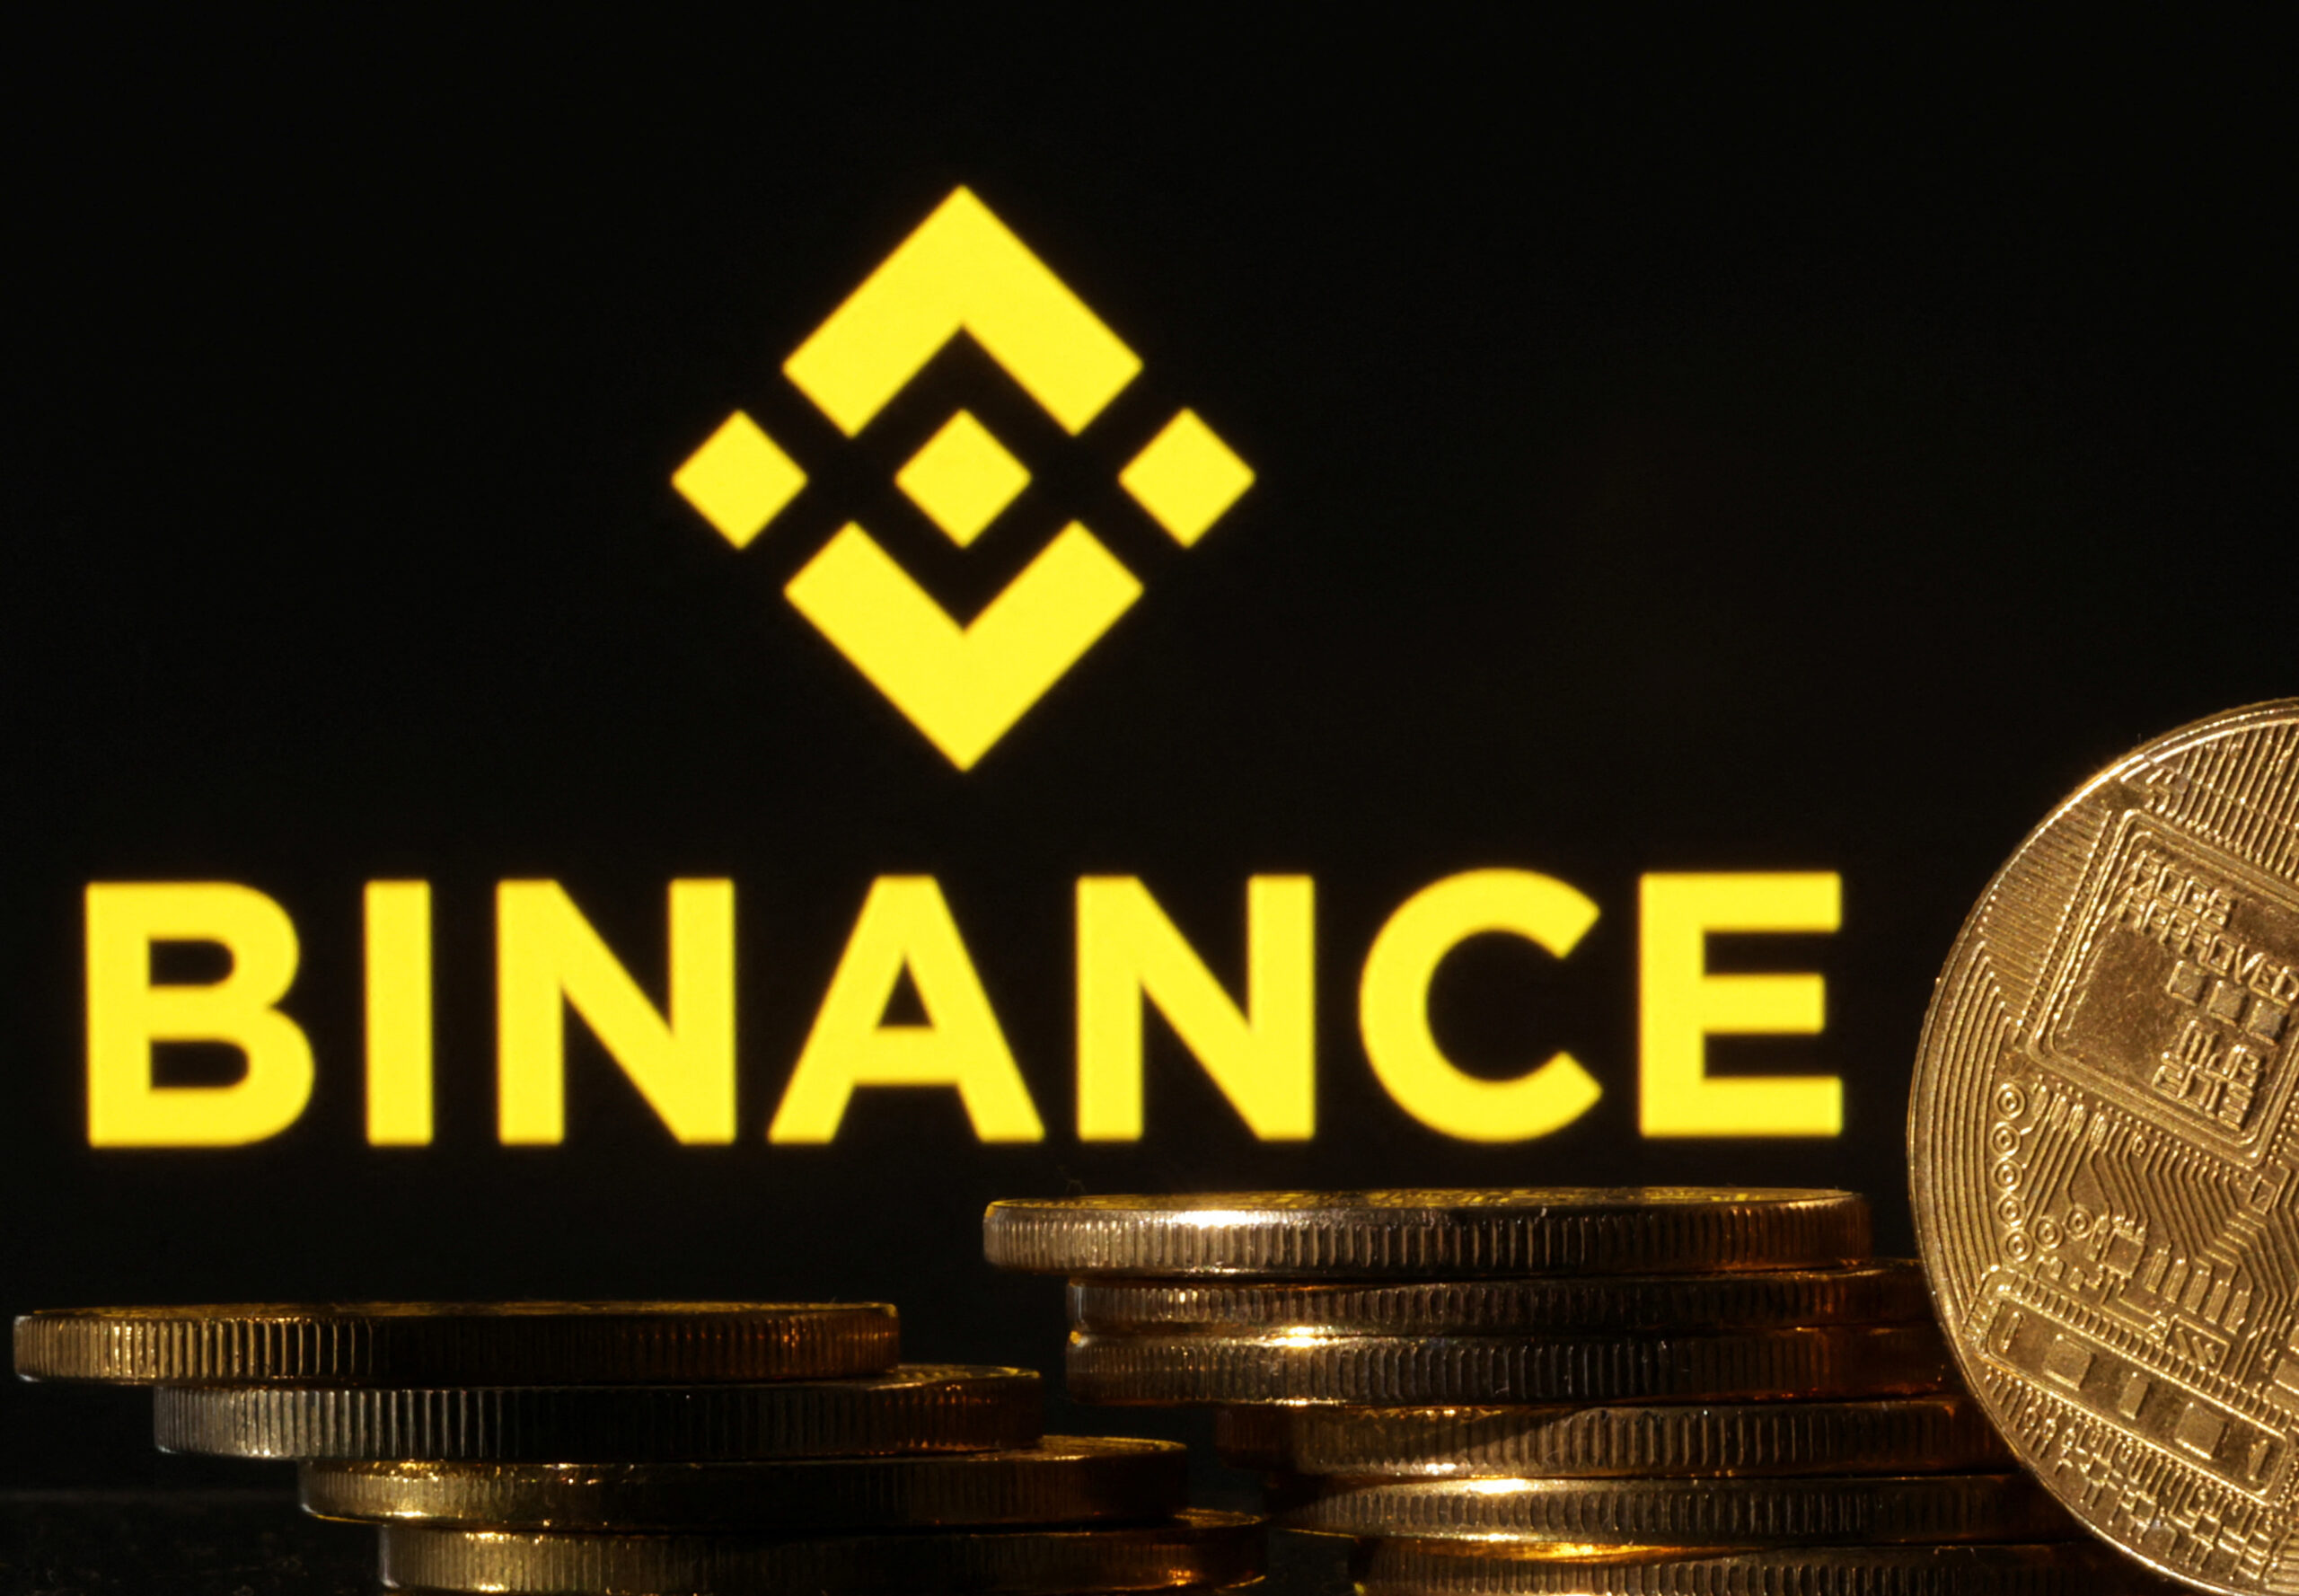 Binance NFT marketplace introduces lending feature collateralized by blue-chip NFTs